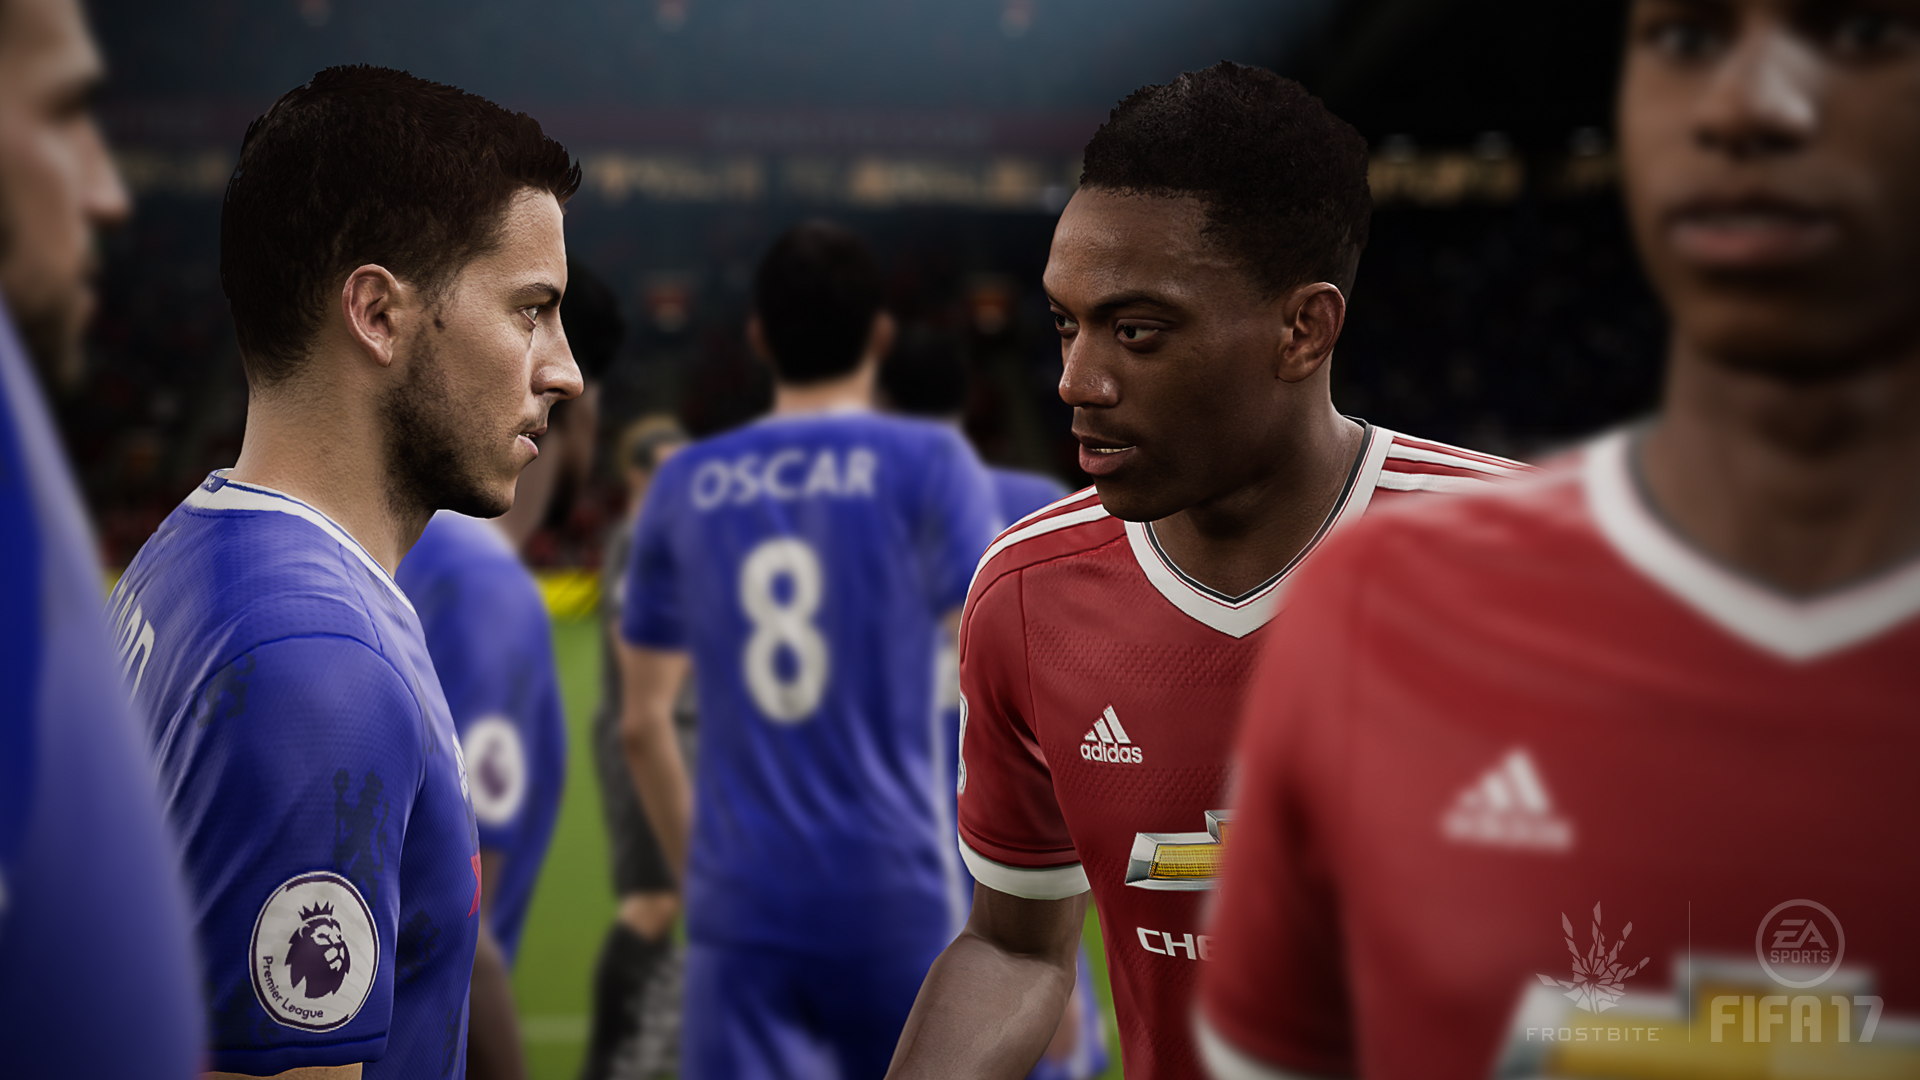 FIFA 17 Beta – Review and First Impressions